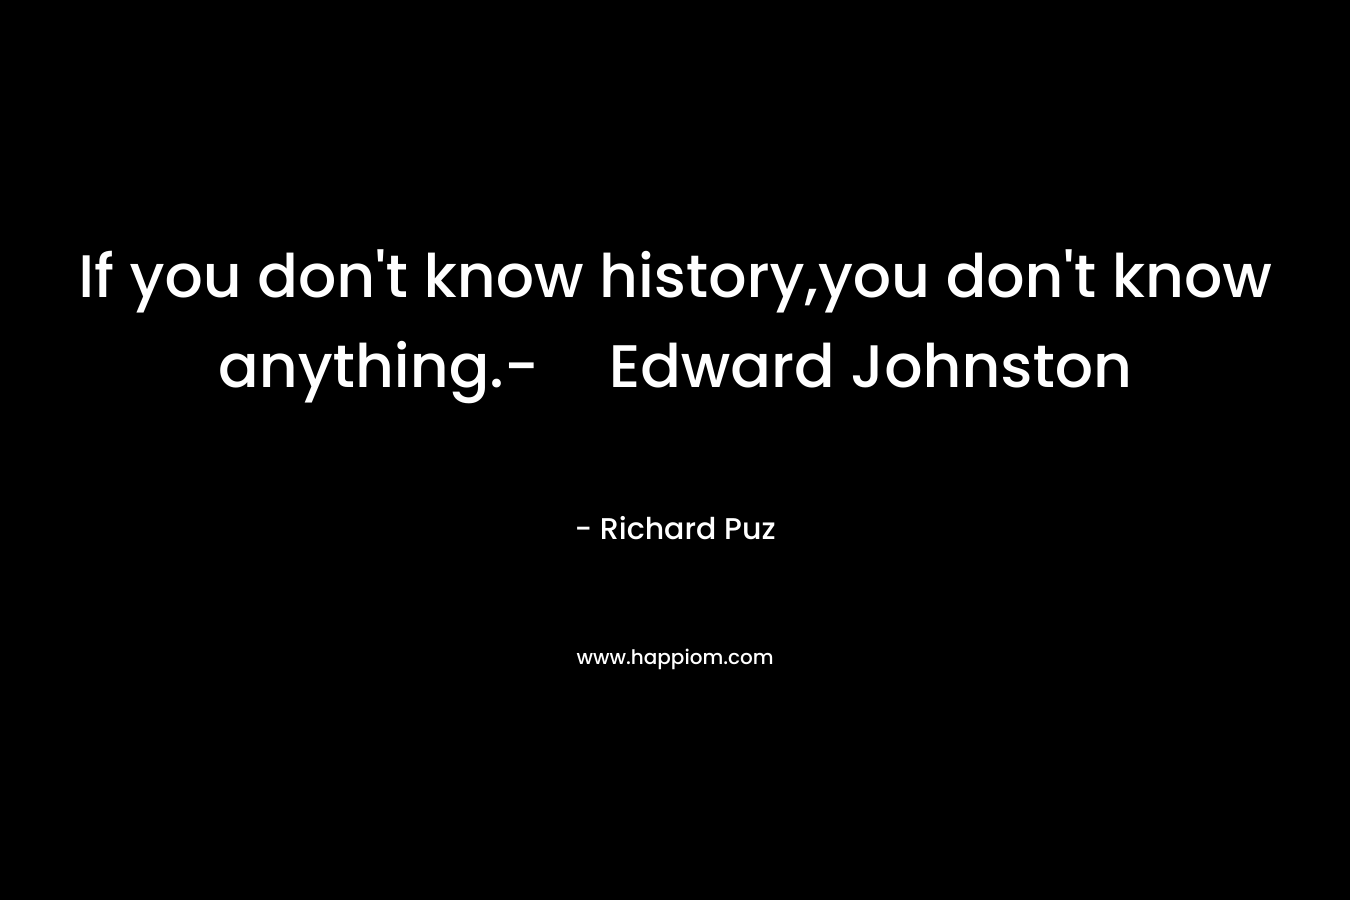 If you don't know history,you don't know anything.-Edward Johnston